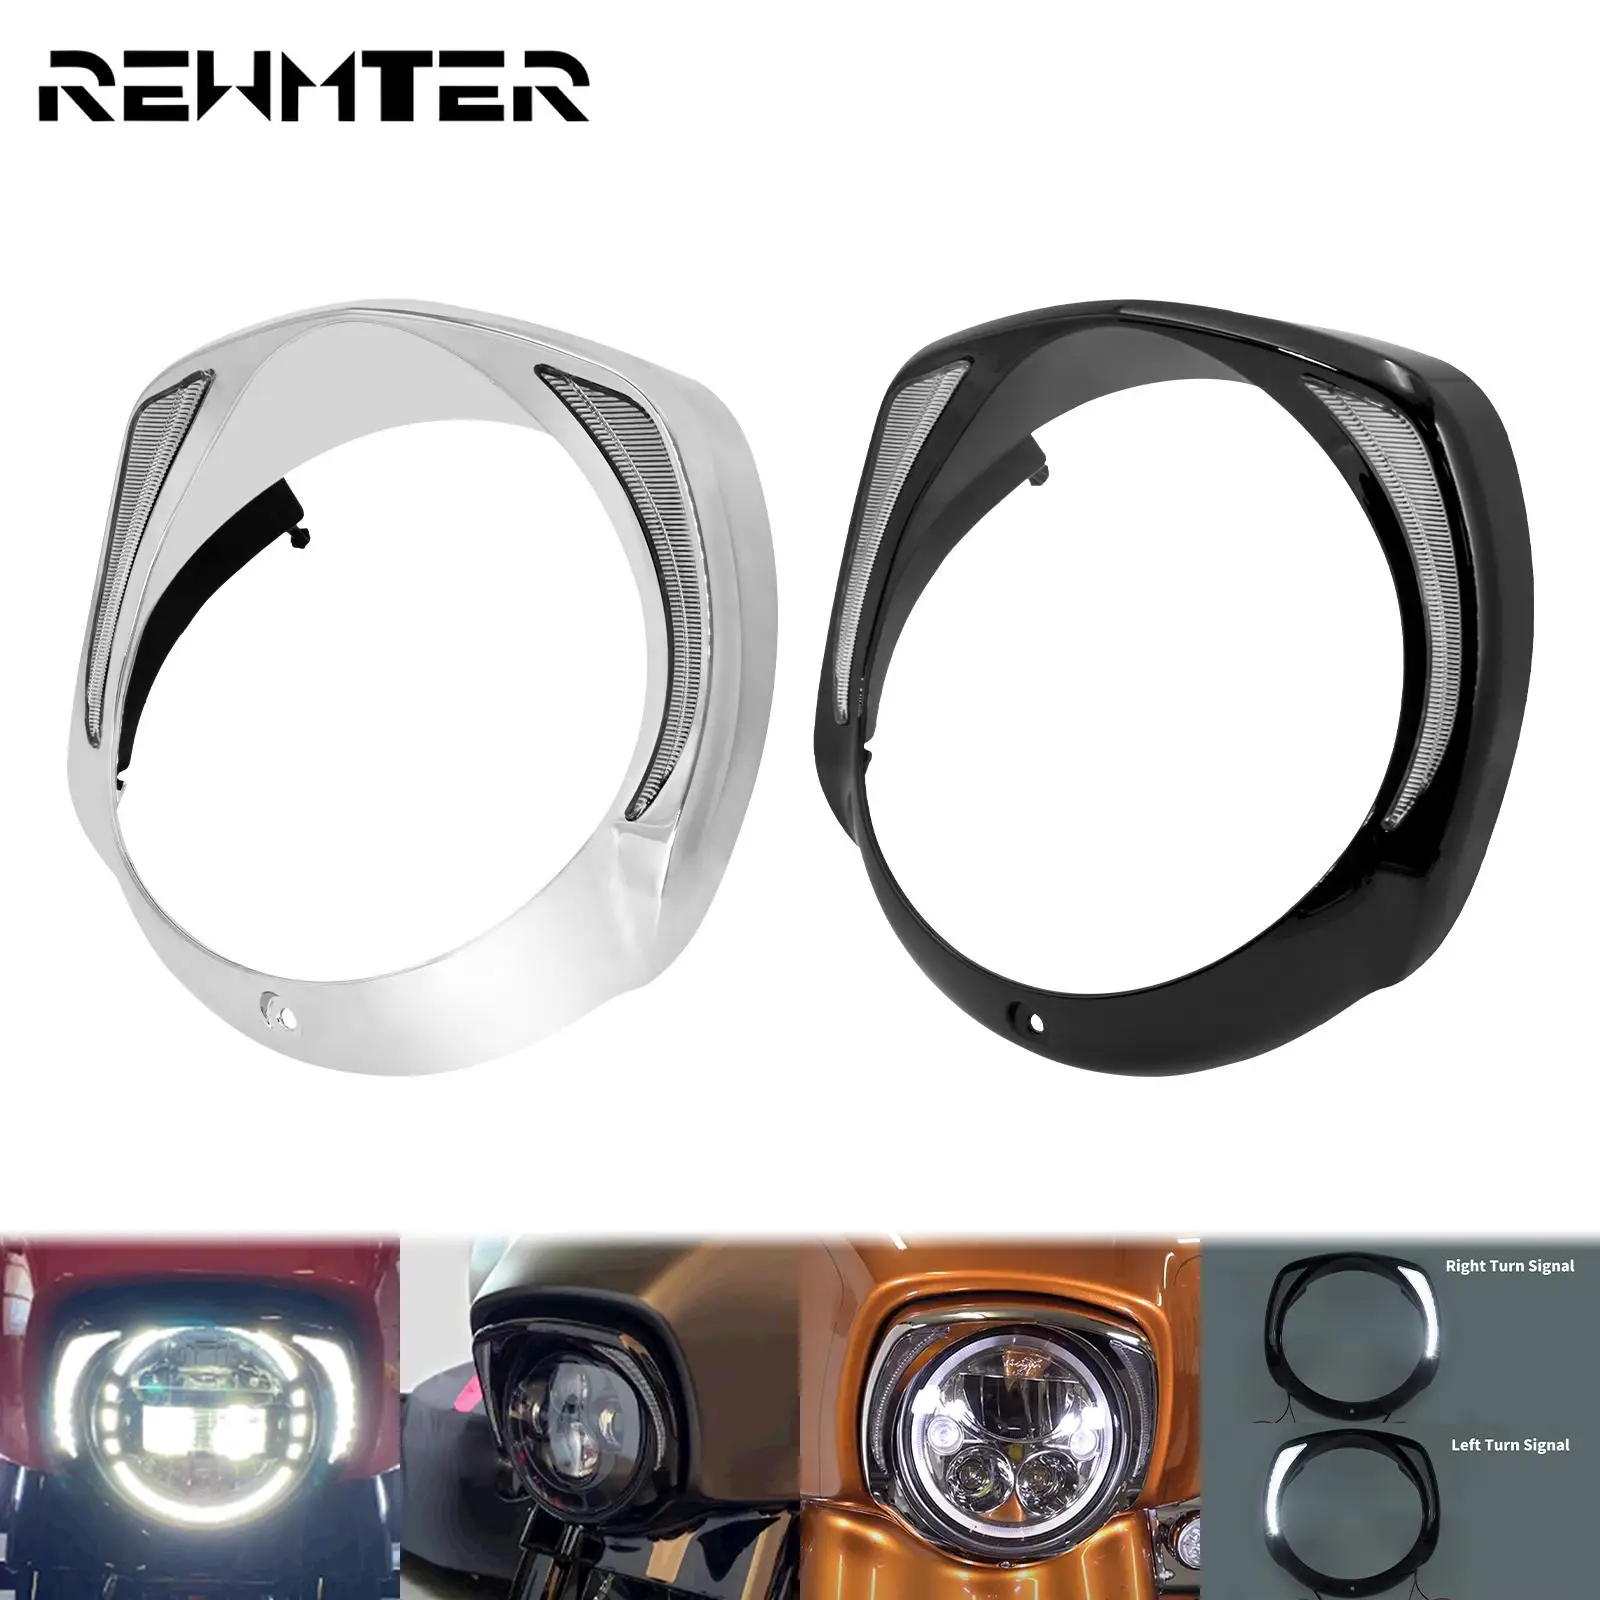 Motorcycle Turn Signal Light Bezels Trim Rings For Harley Touring Road Glide FLH